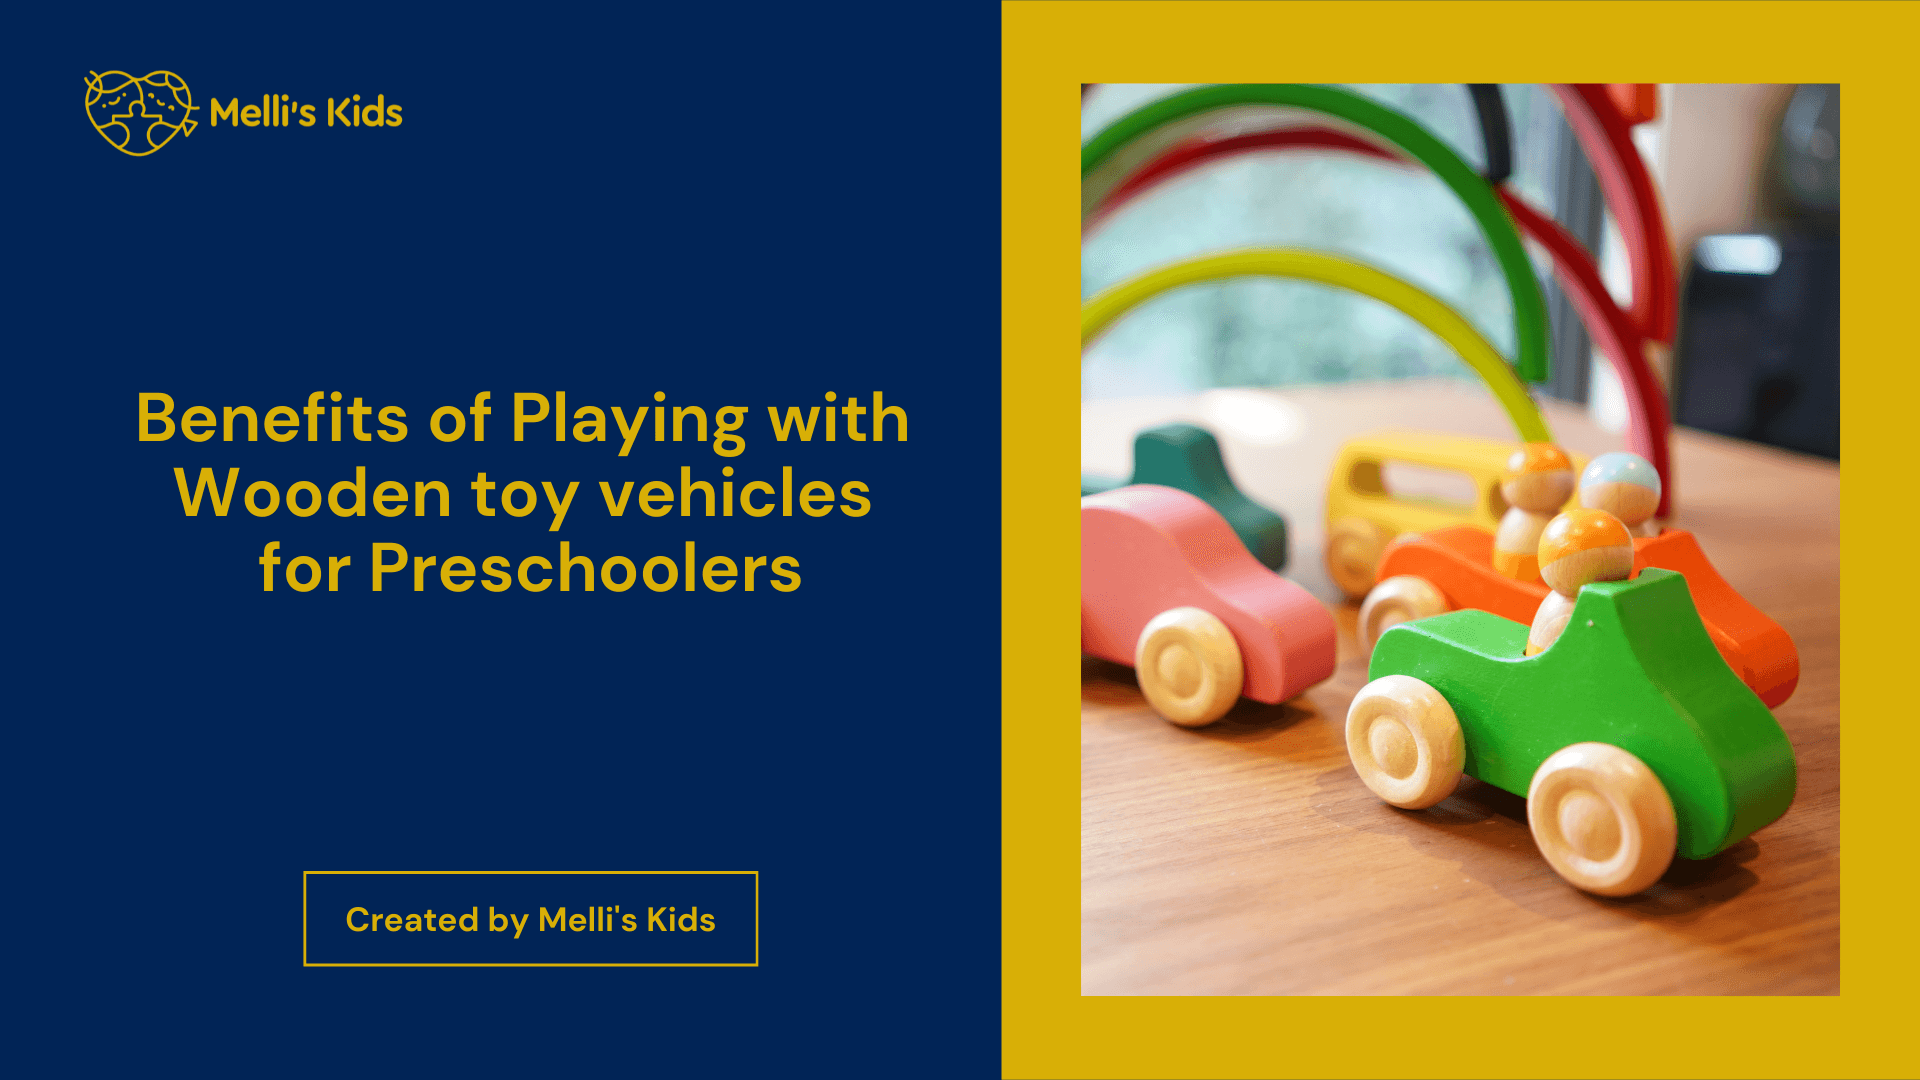 Benefits of Playing with Wooden toy vehicles for Preschoolers - Melli's Kids